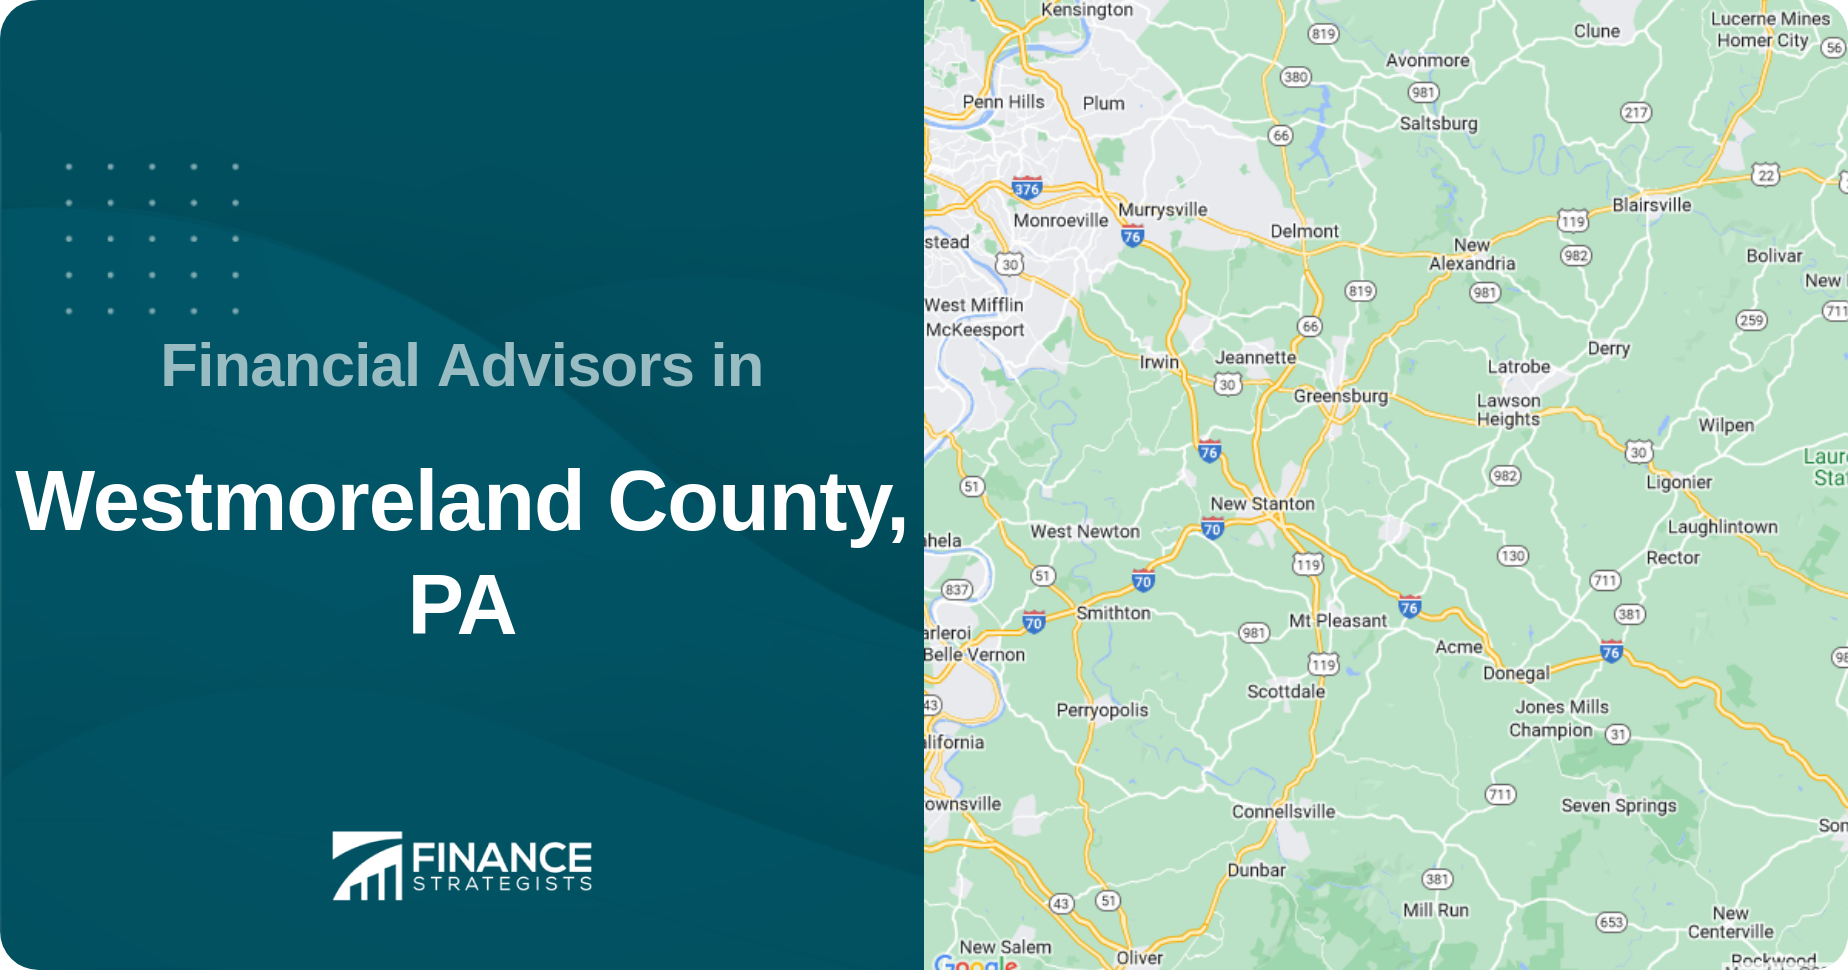 Financial Advisors in Westmoreland County, PA